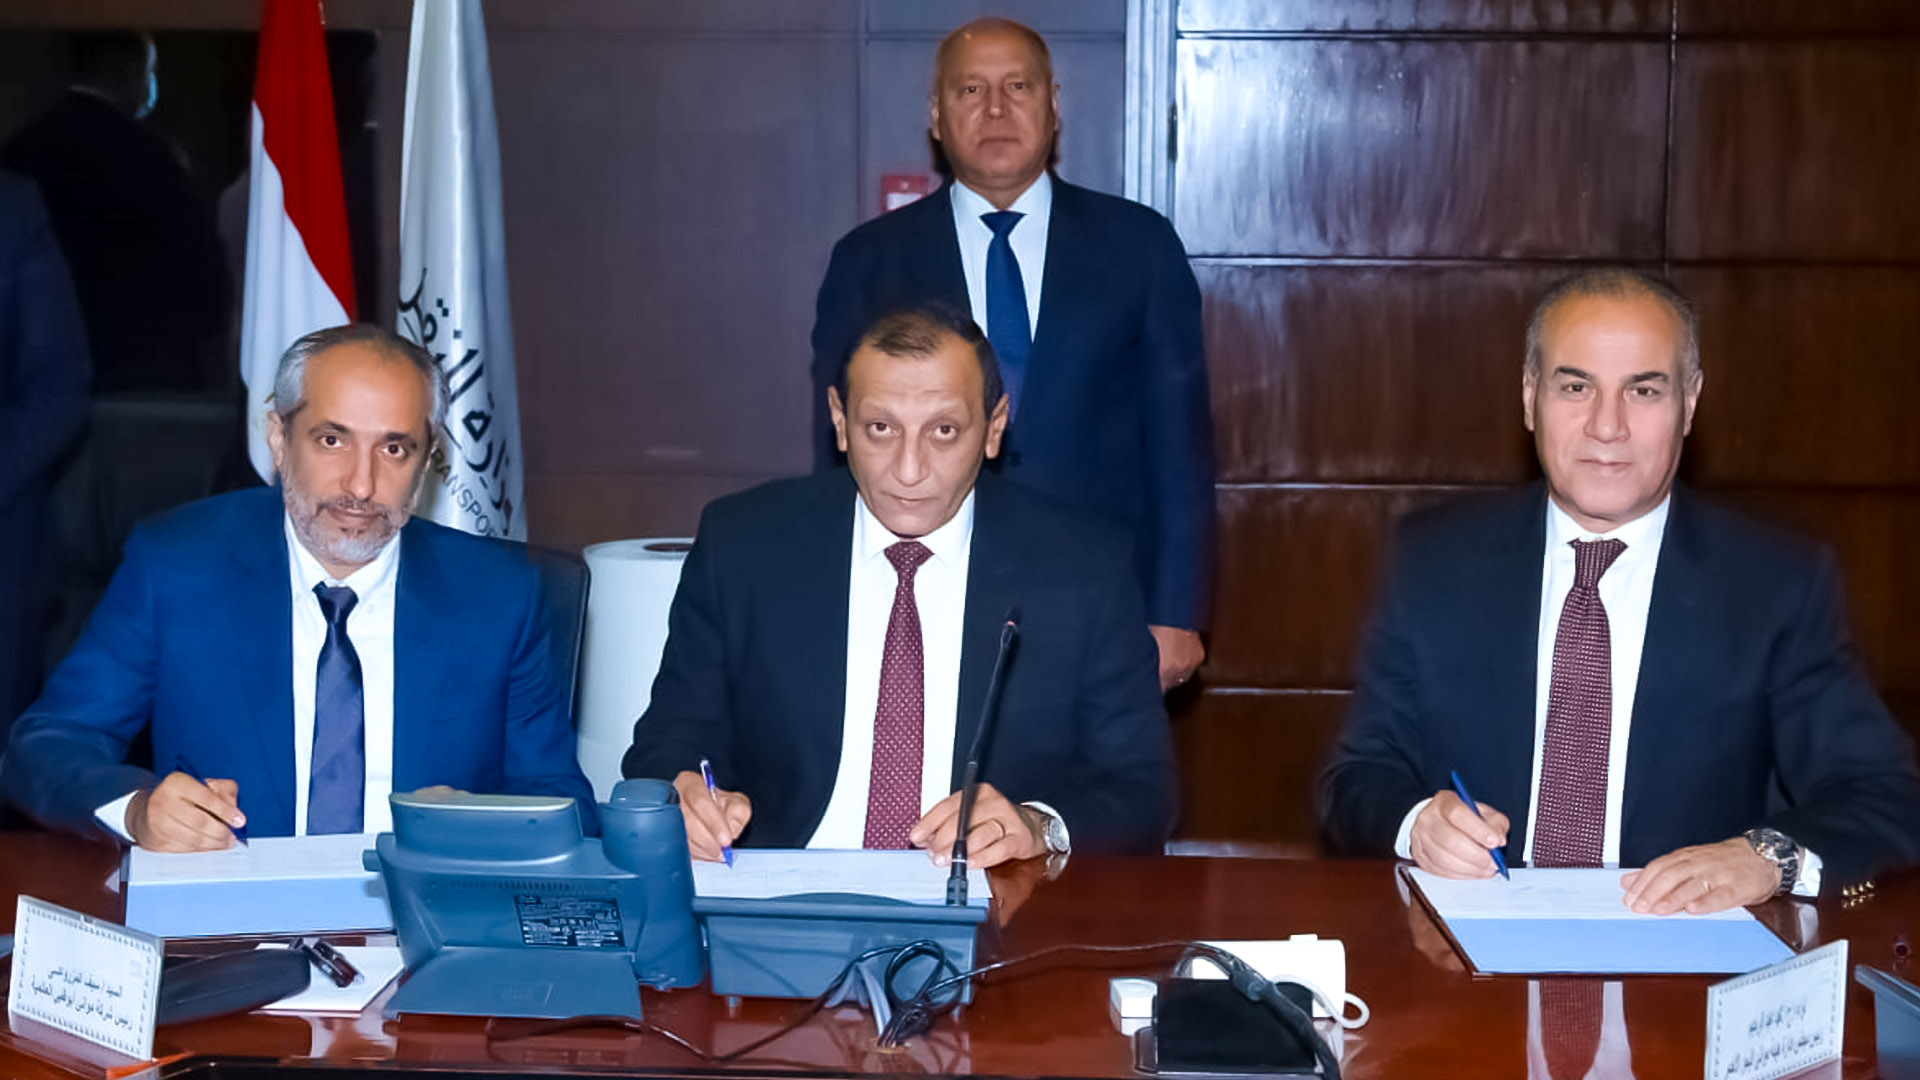 AD Ports Group signs agreements for port projects in Egypt